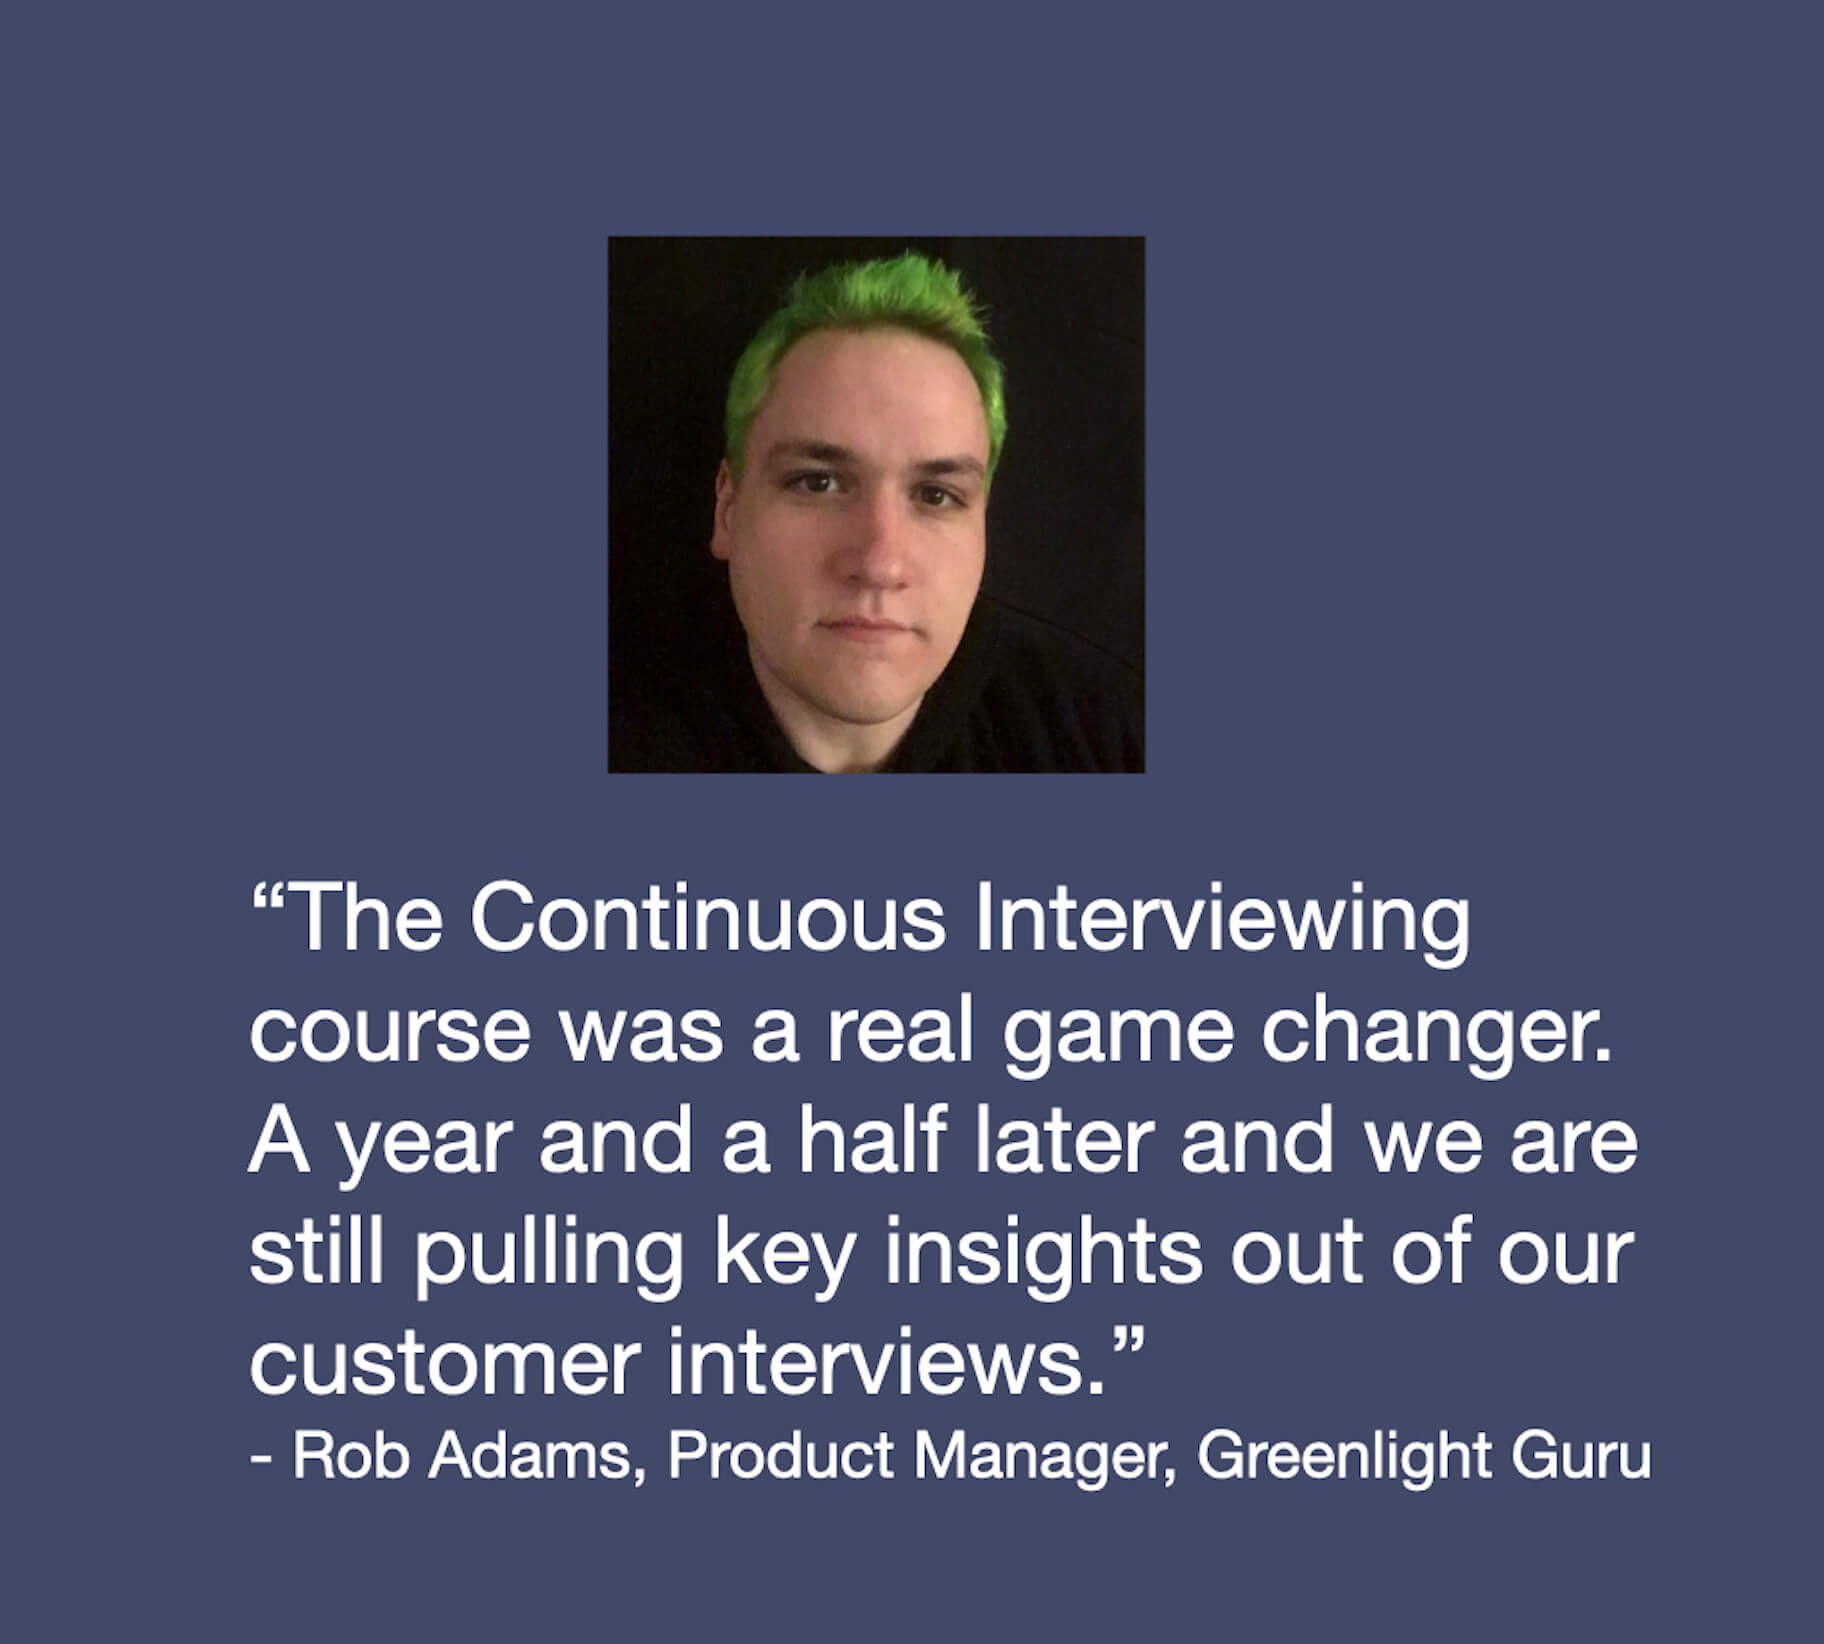 A headshot of Rob Adams. Below the headshot is the following quote: "The Continuous Interviewing course was a real game changer. A year and a half later and we are still pulling key insights out of our customer interviews." The quote is attributed to Rob Adams, Product Manager, Greenlight Guru.